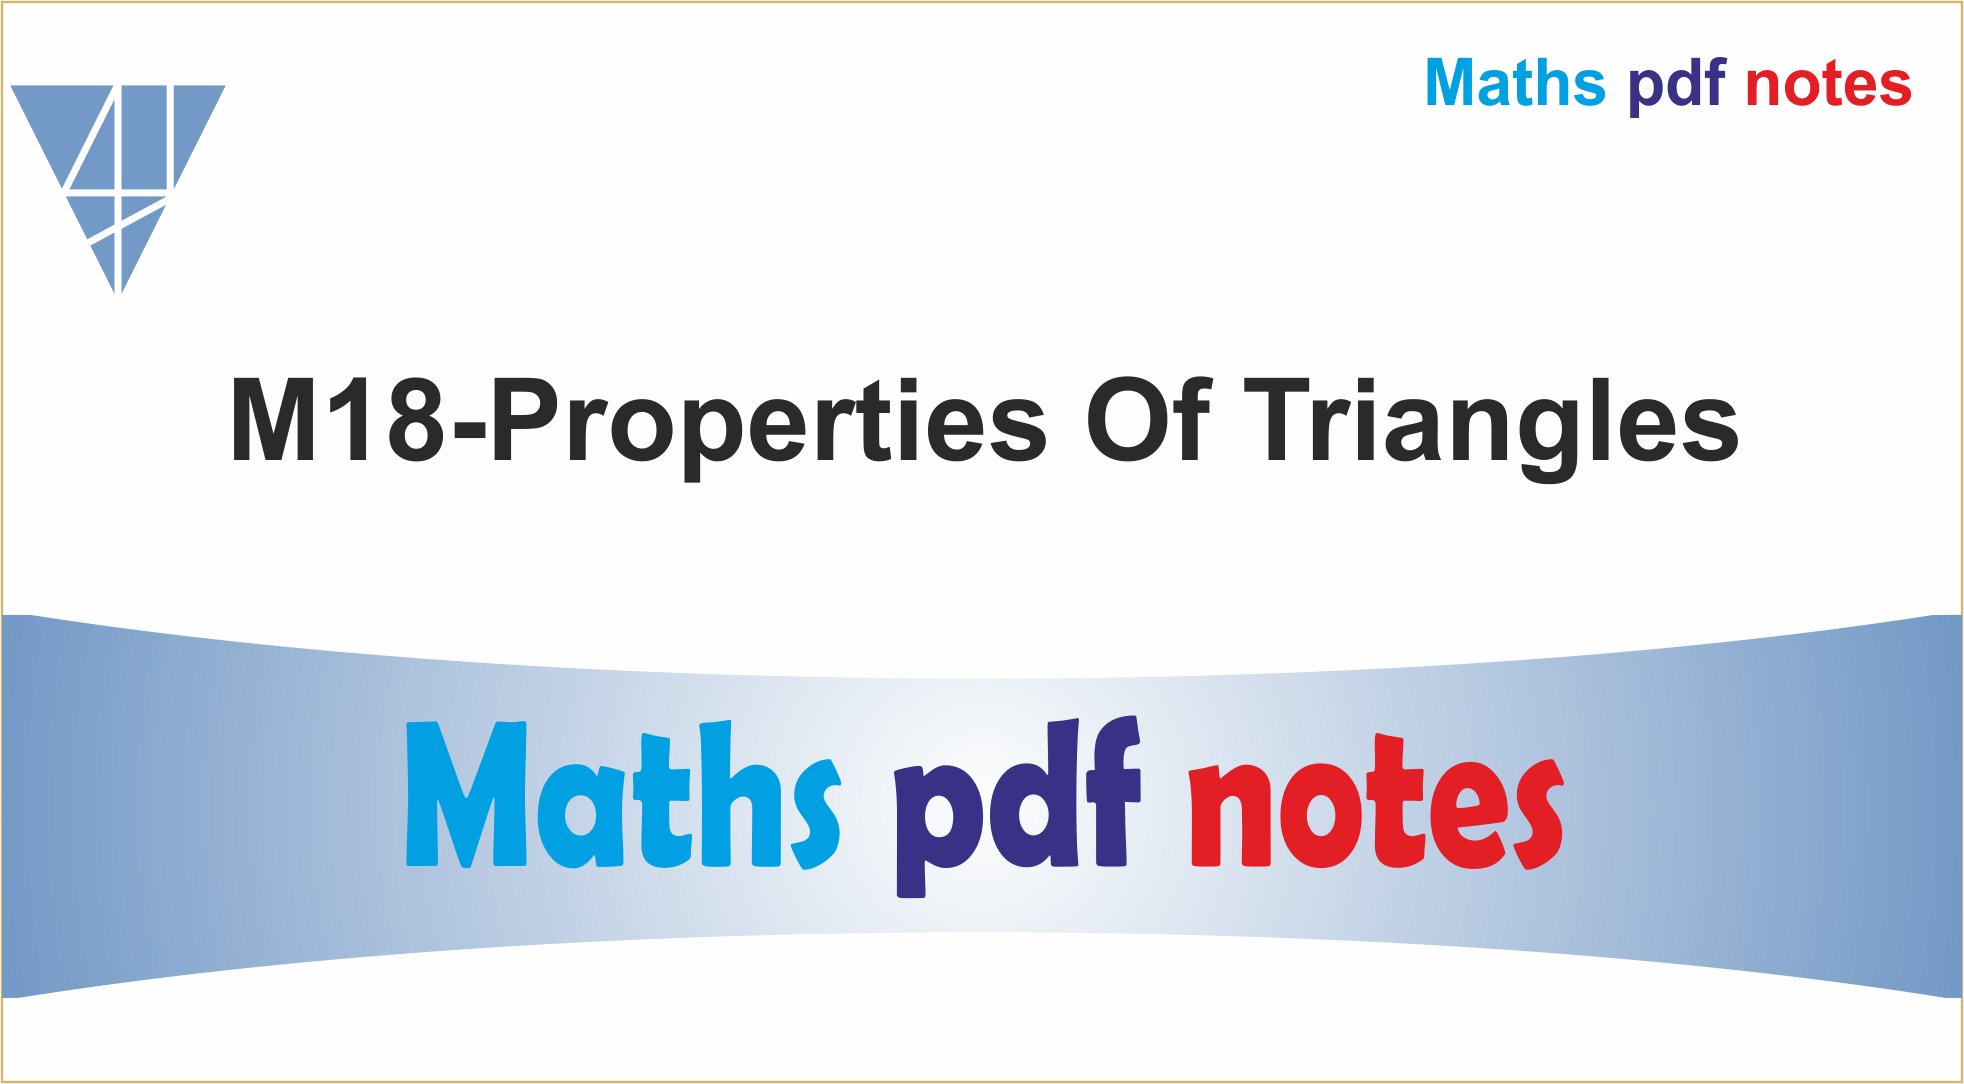 M18-Properties of Triangles